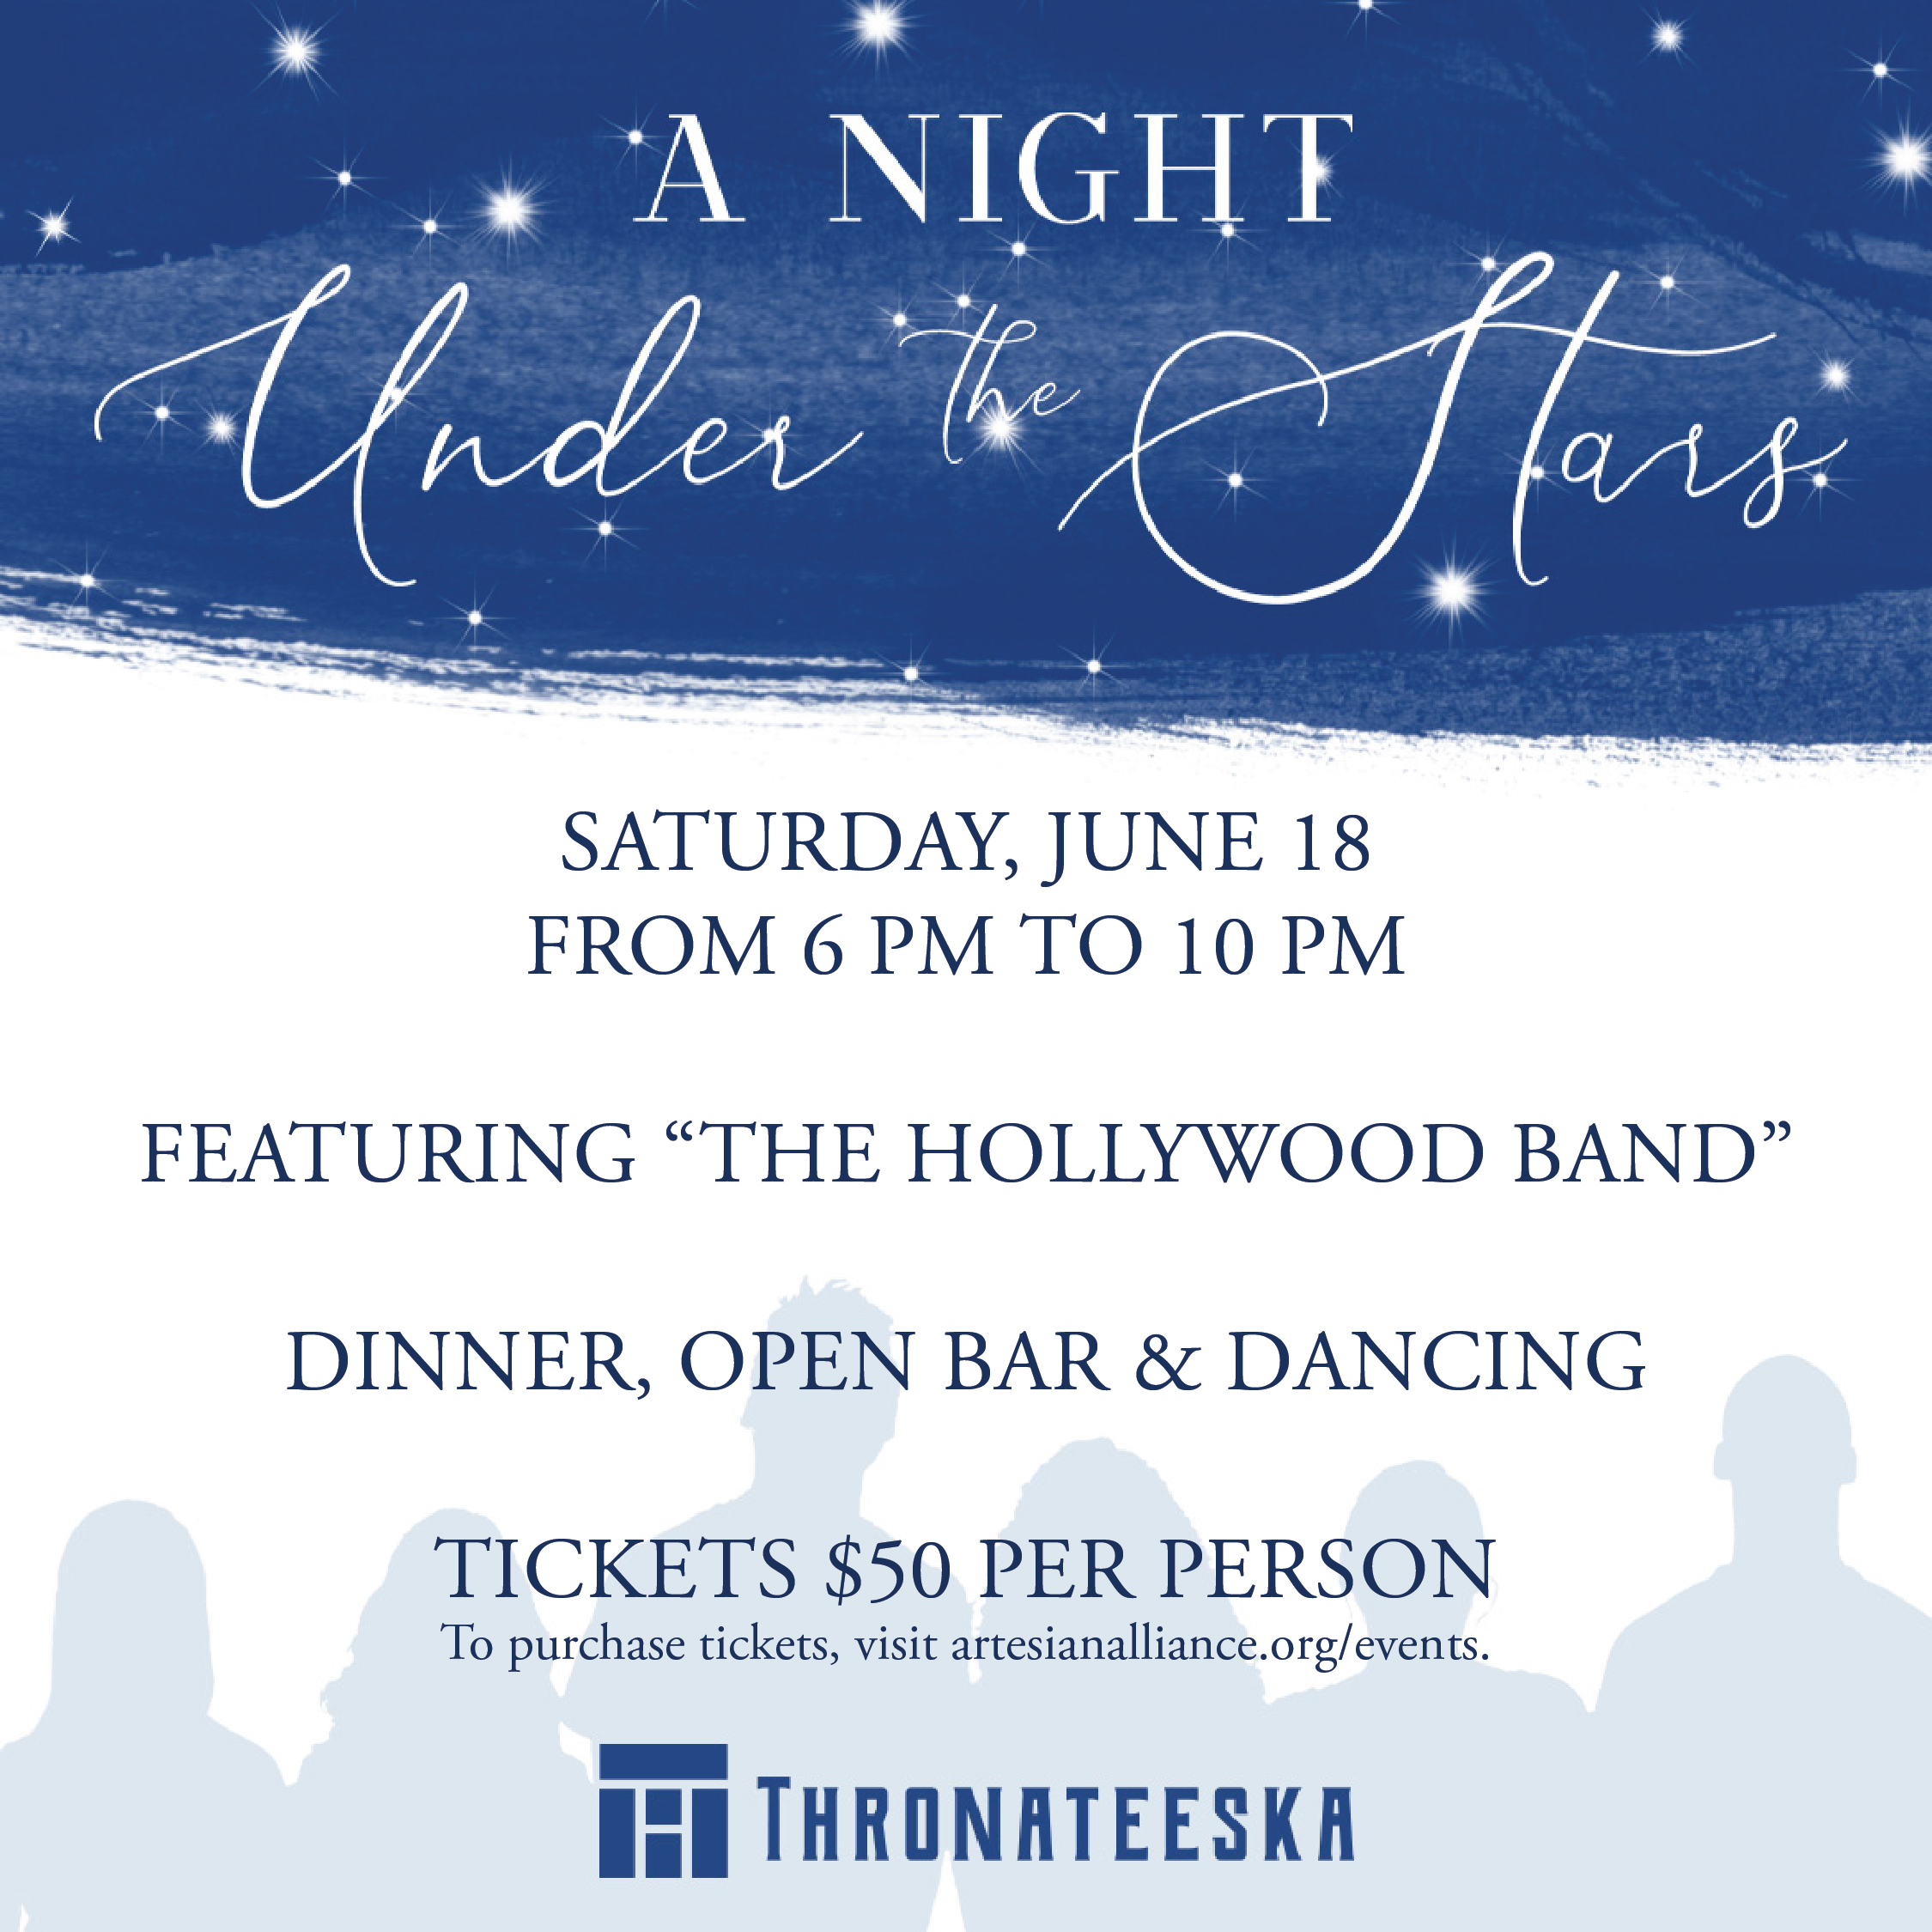 A Night Under the Stars
A block party style celebration on the bricks as we celebrate our community! Dinner, open bar & dancing featuring “The Hollywood Band.”
Purchase Tickets